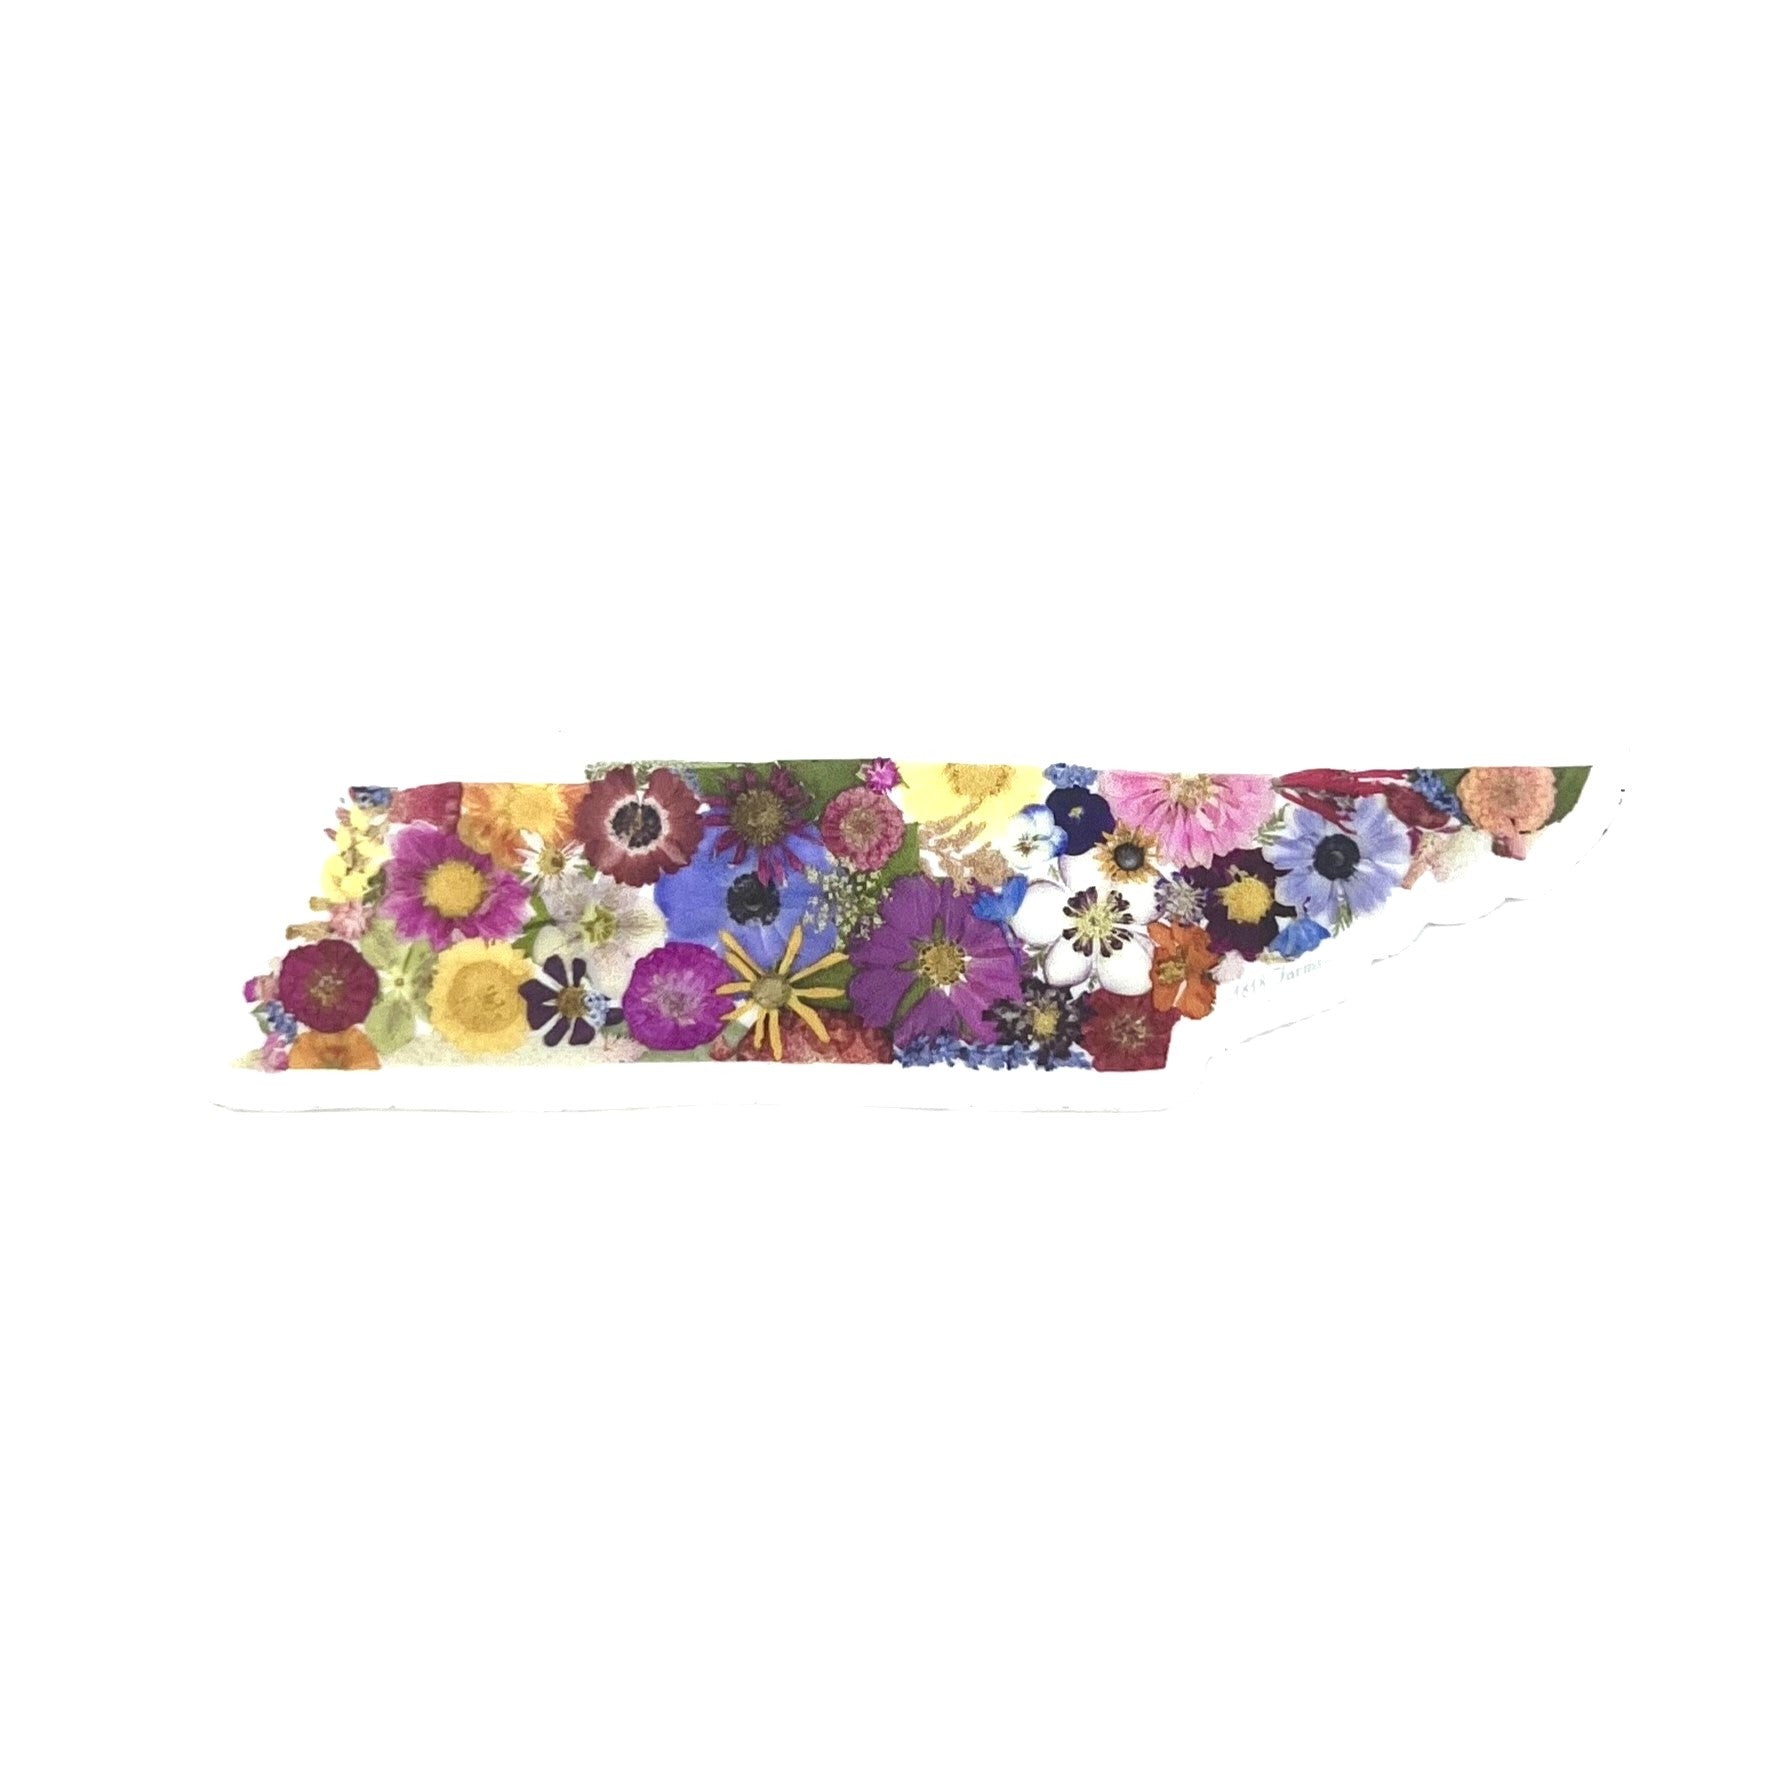 State Themed Vinyl Sticker Featuring Dried, Pressed Flowers - "Where I Bloom" Collection Vinyl Sticker 1818 Farms Tennesse  